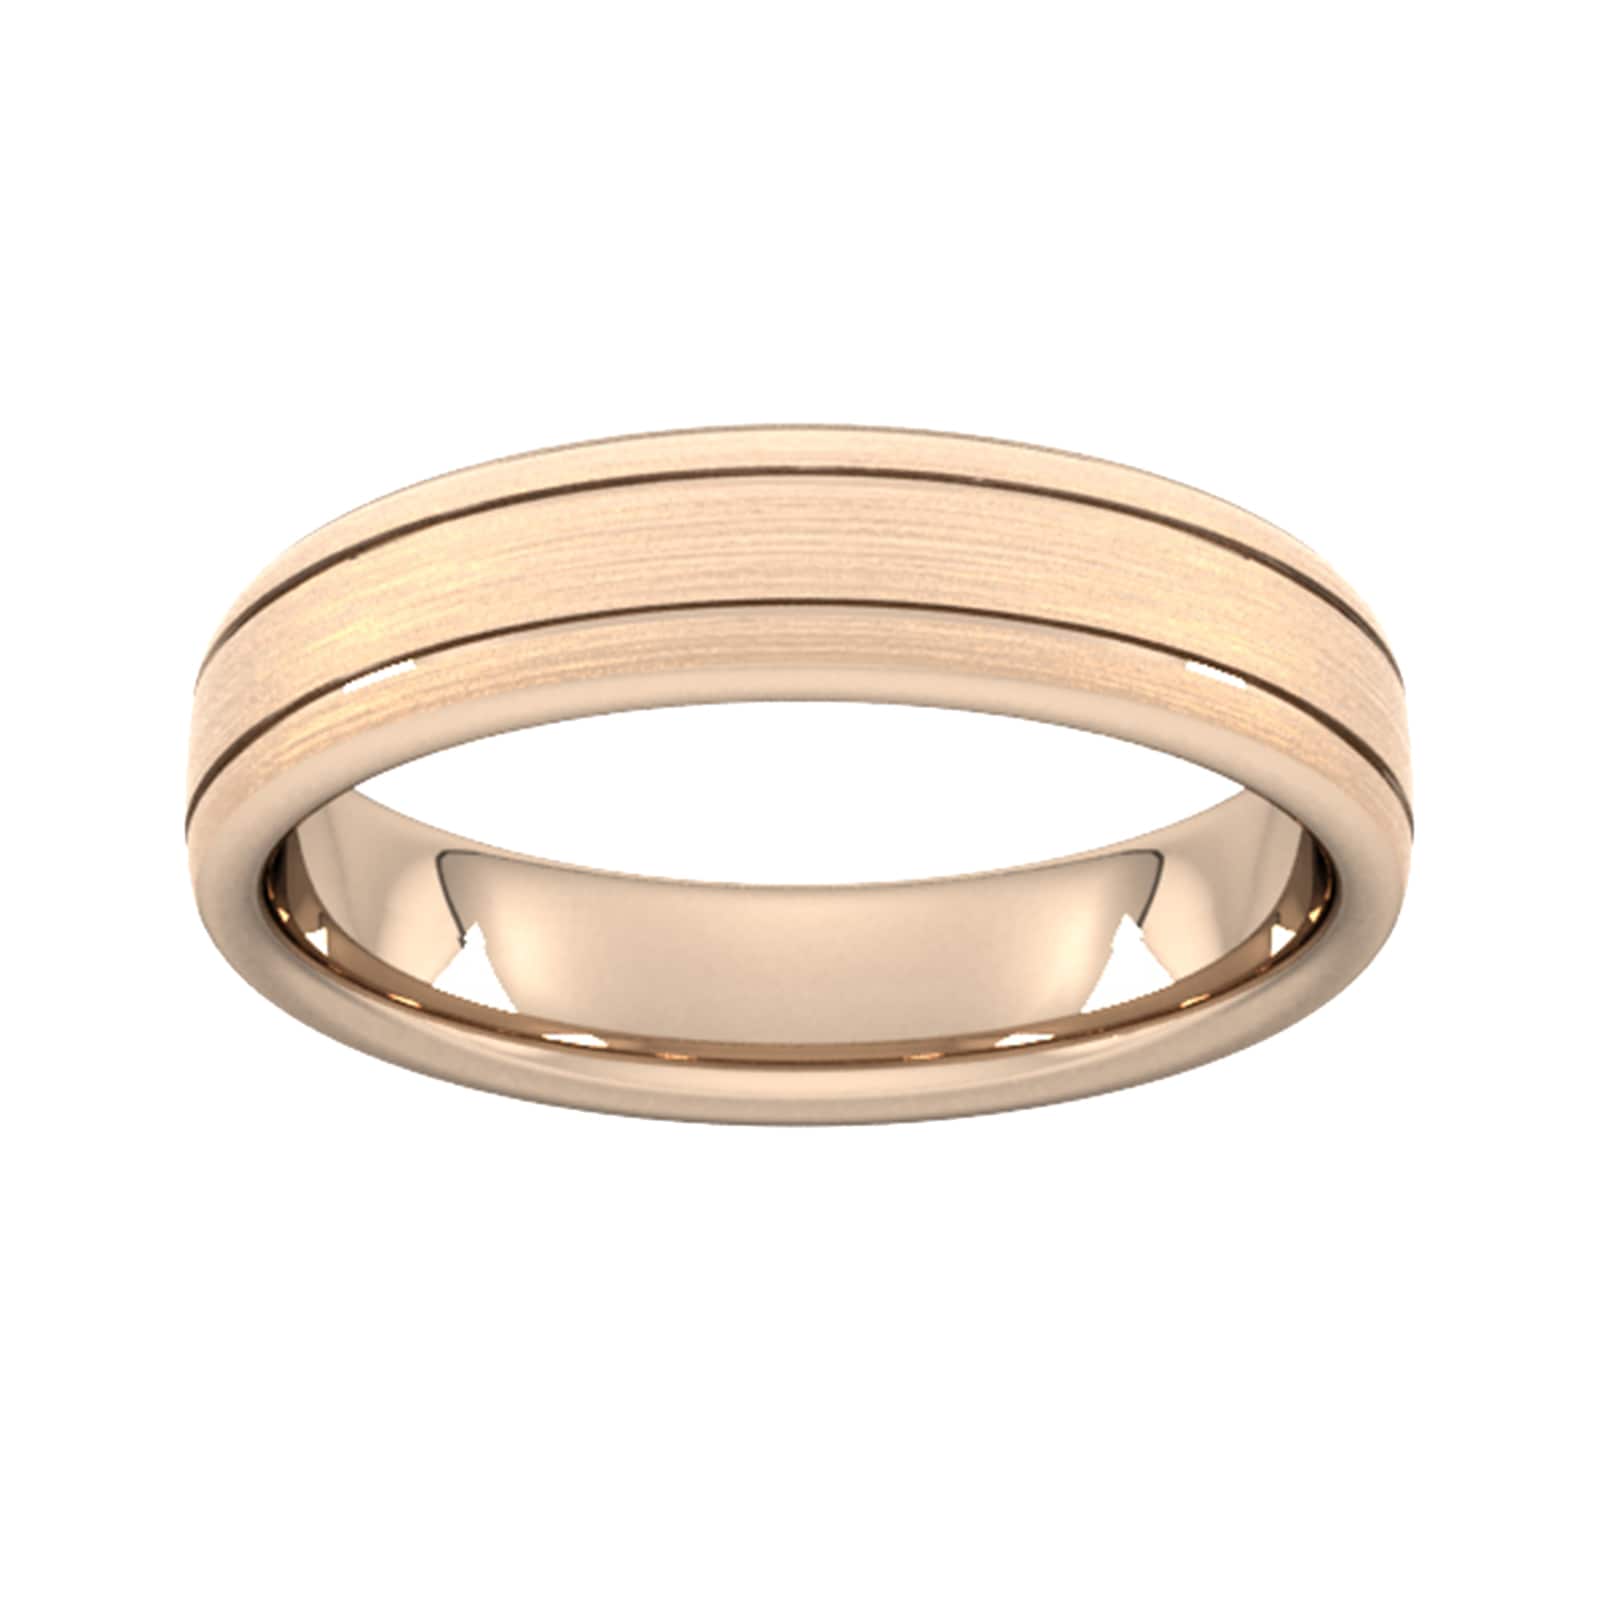 5mm Slight Court Extra Heavy Matt Finish With Double Grooves Wedding Ring In 9 Carat Rose Gold - Ring Size V